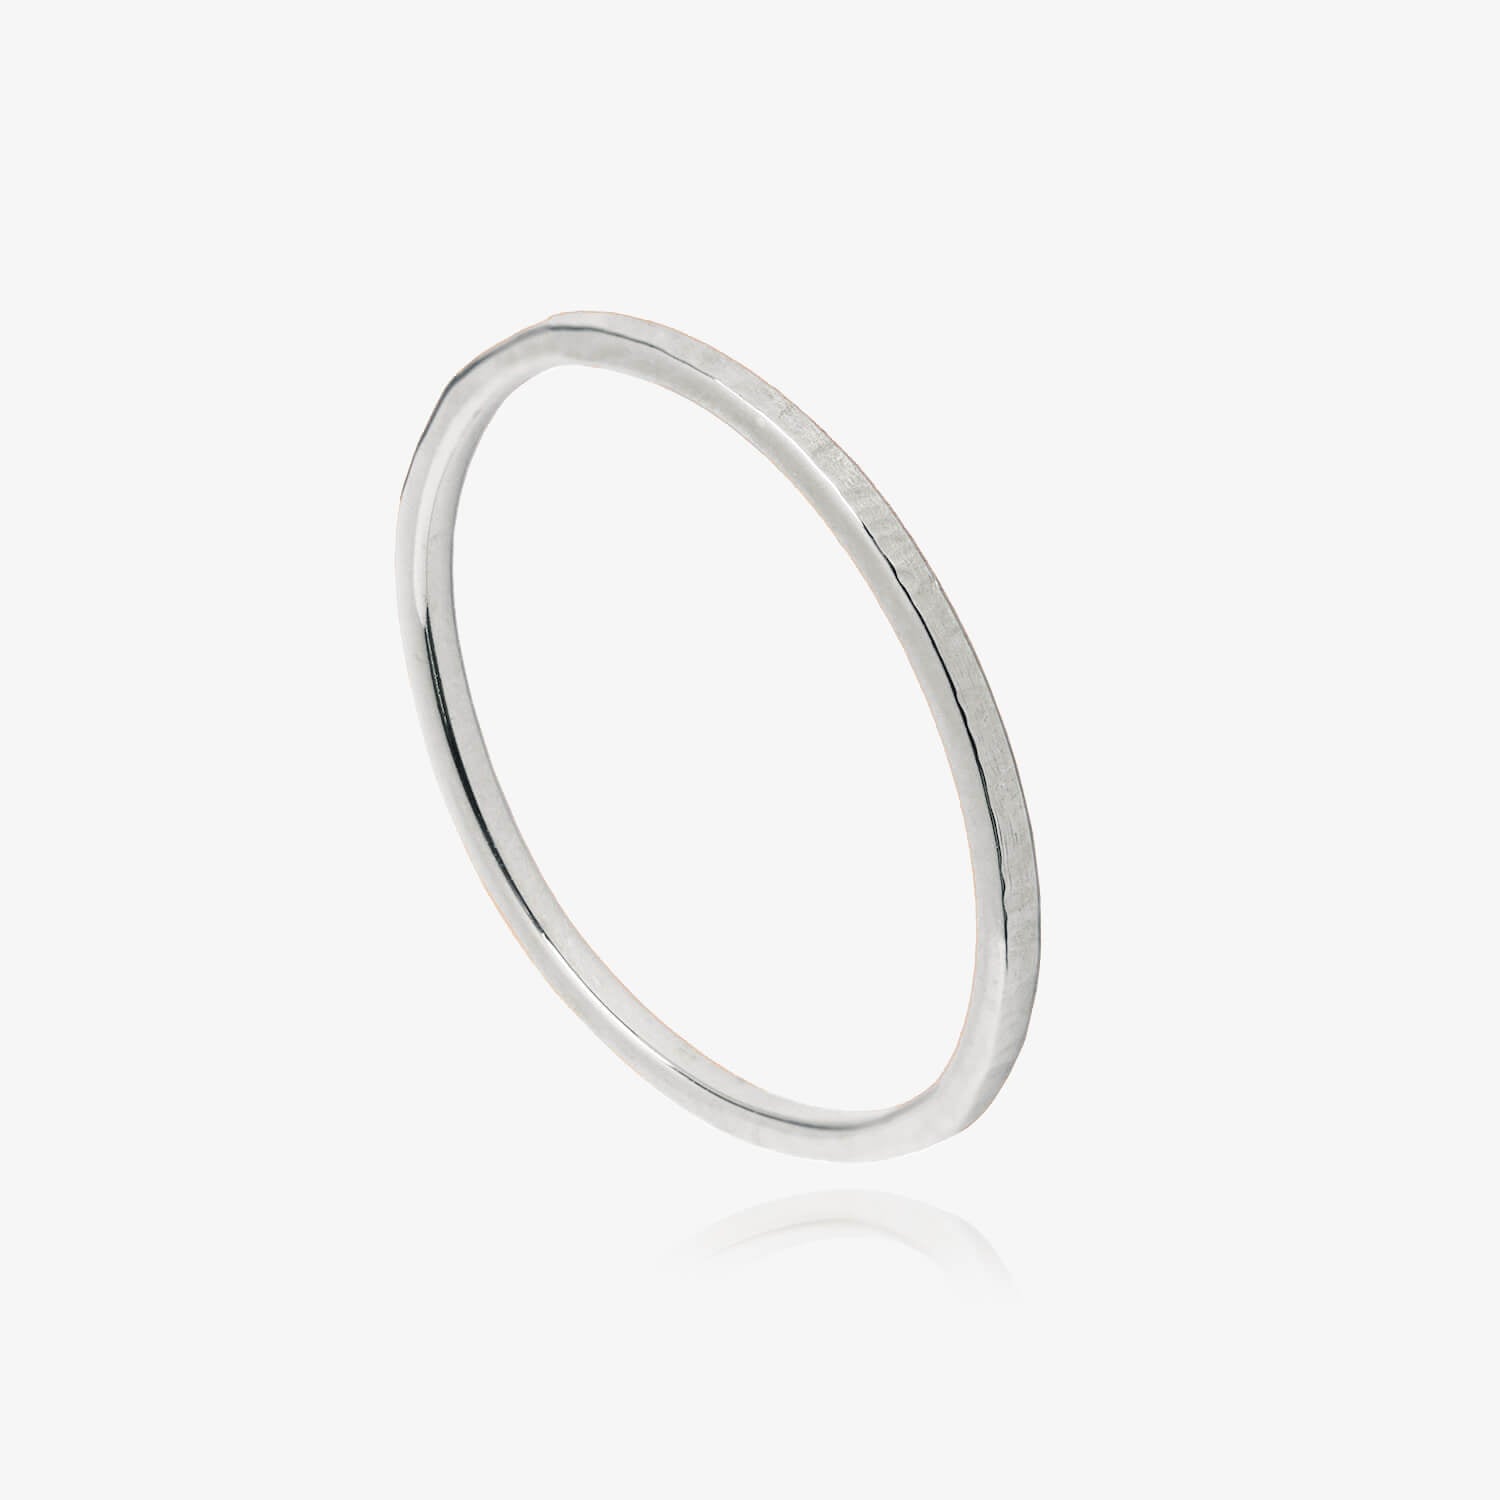 Textured silver ring on a white background